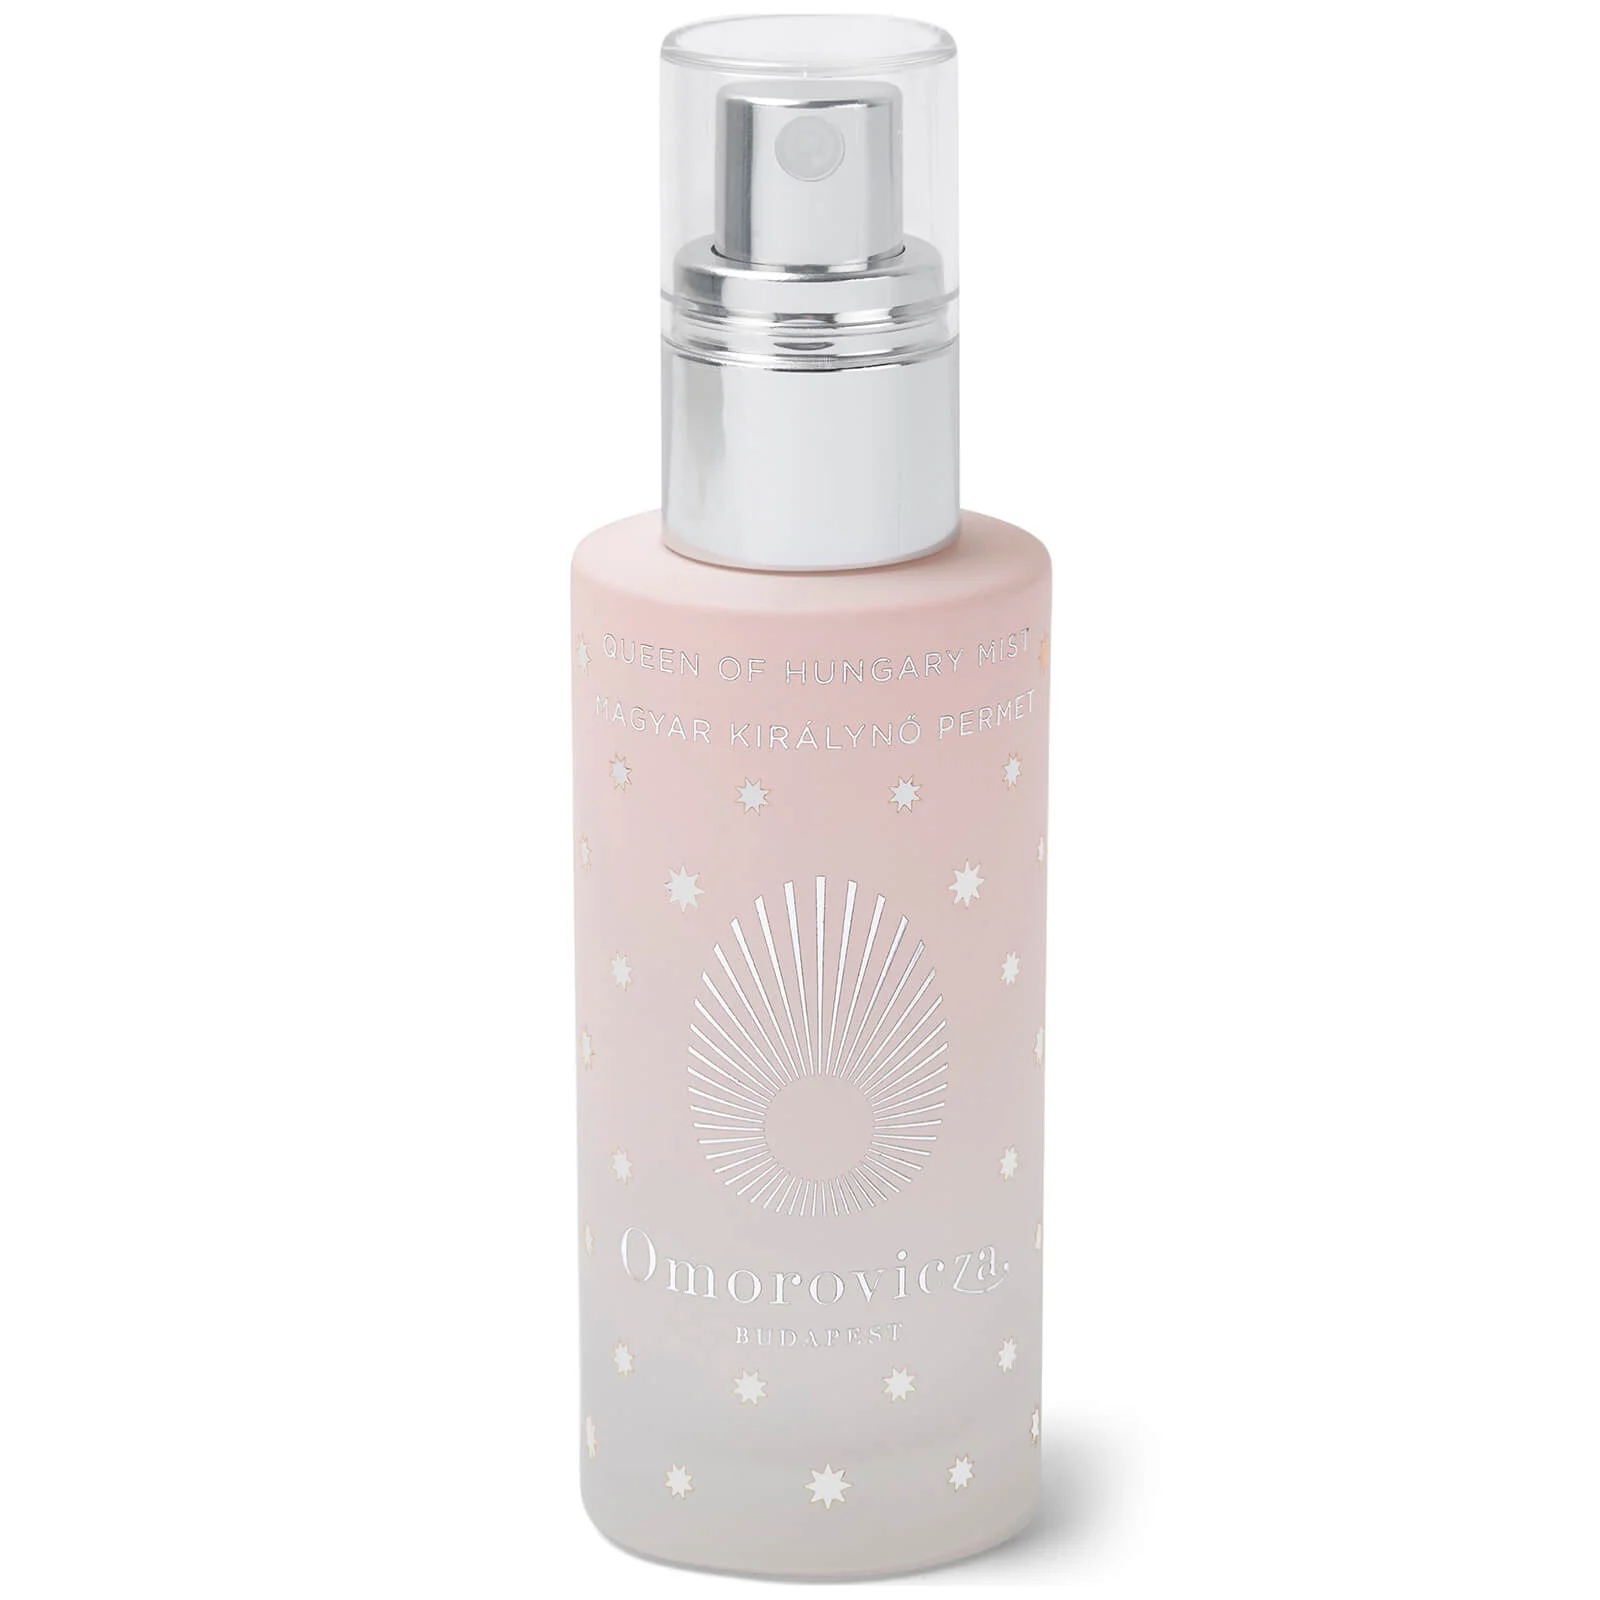 Omorovicza Queen of Hungary Mist Limited Edition (50ml) Image 1